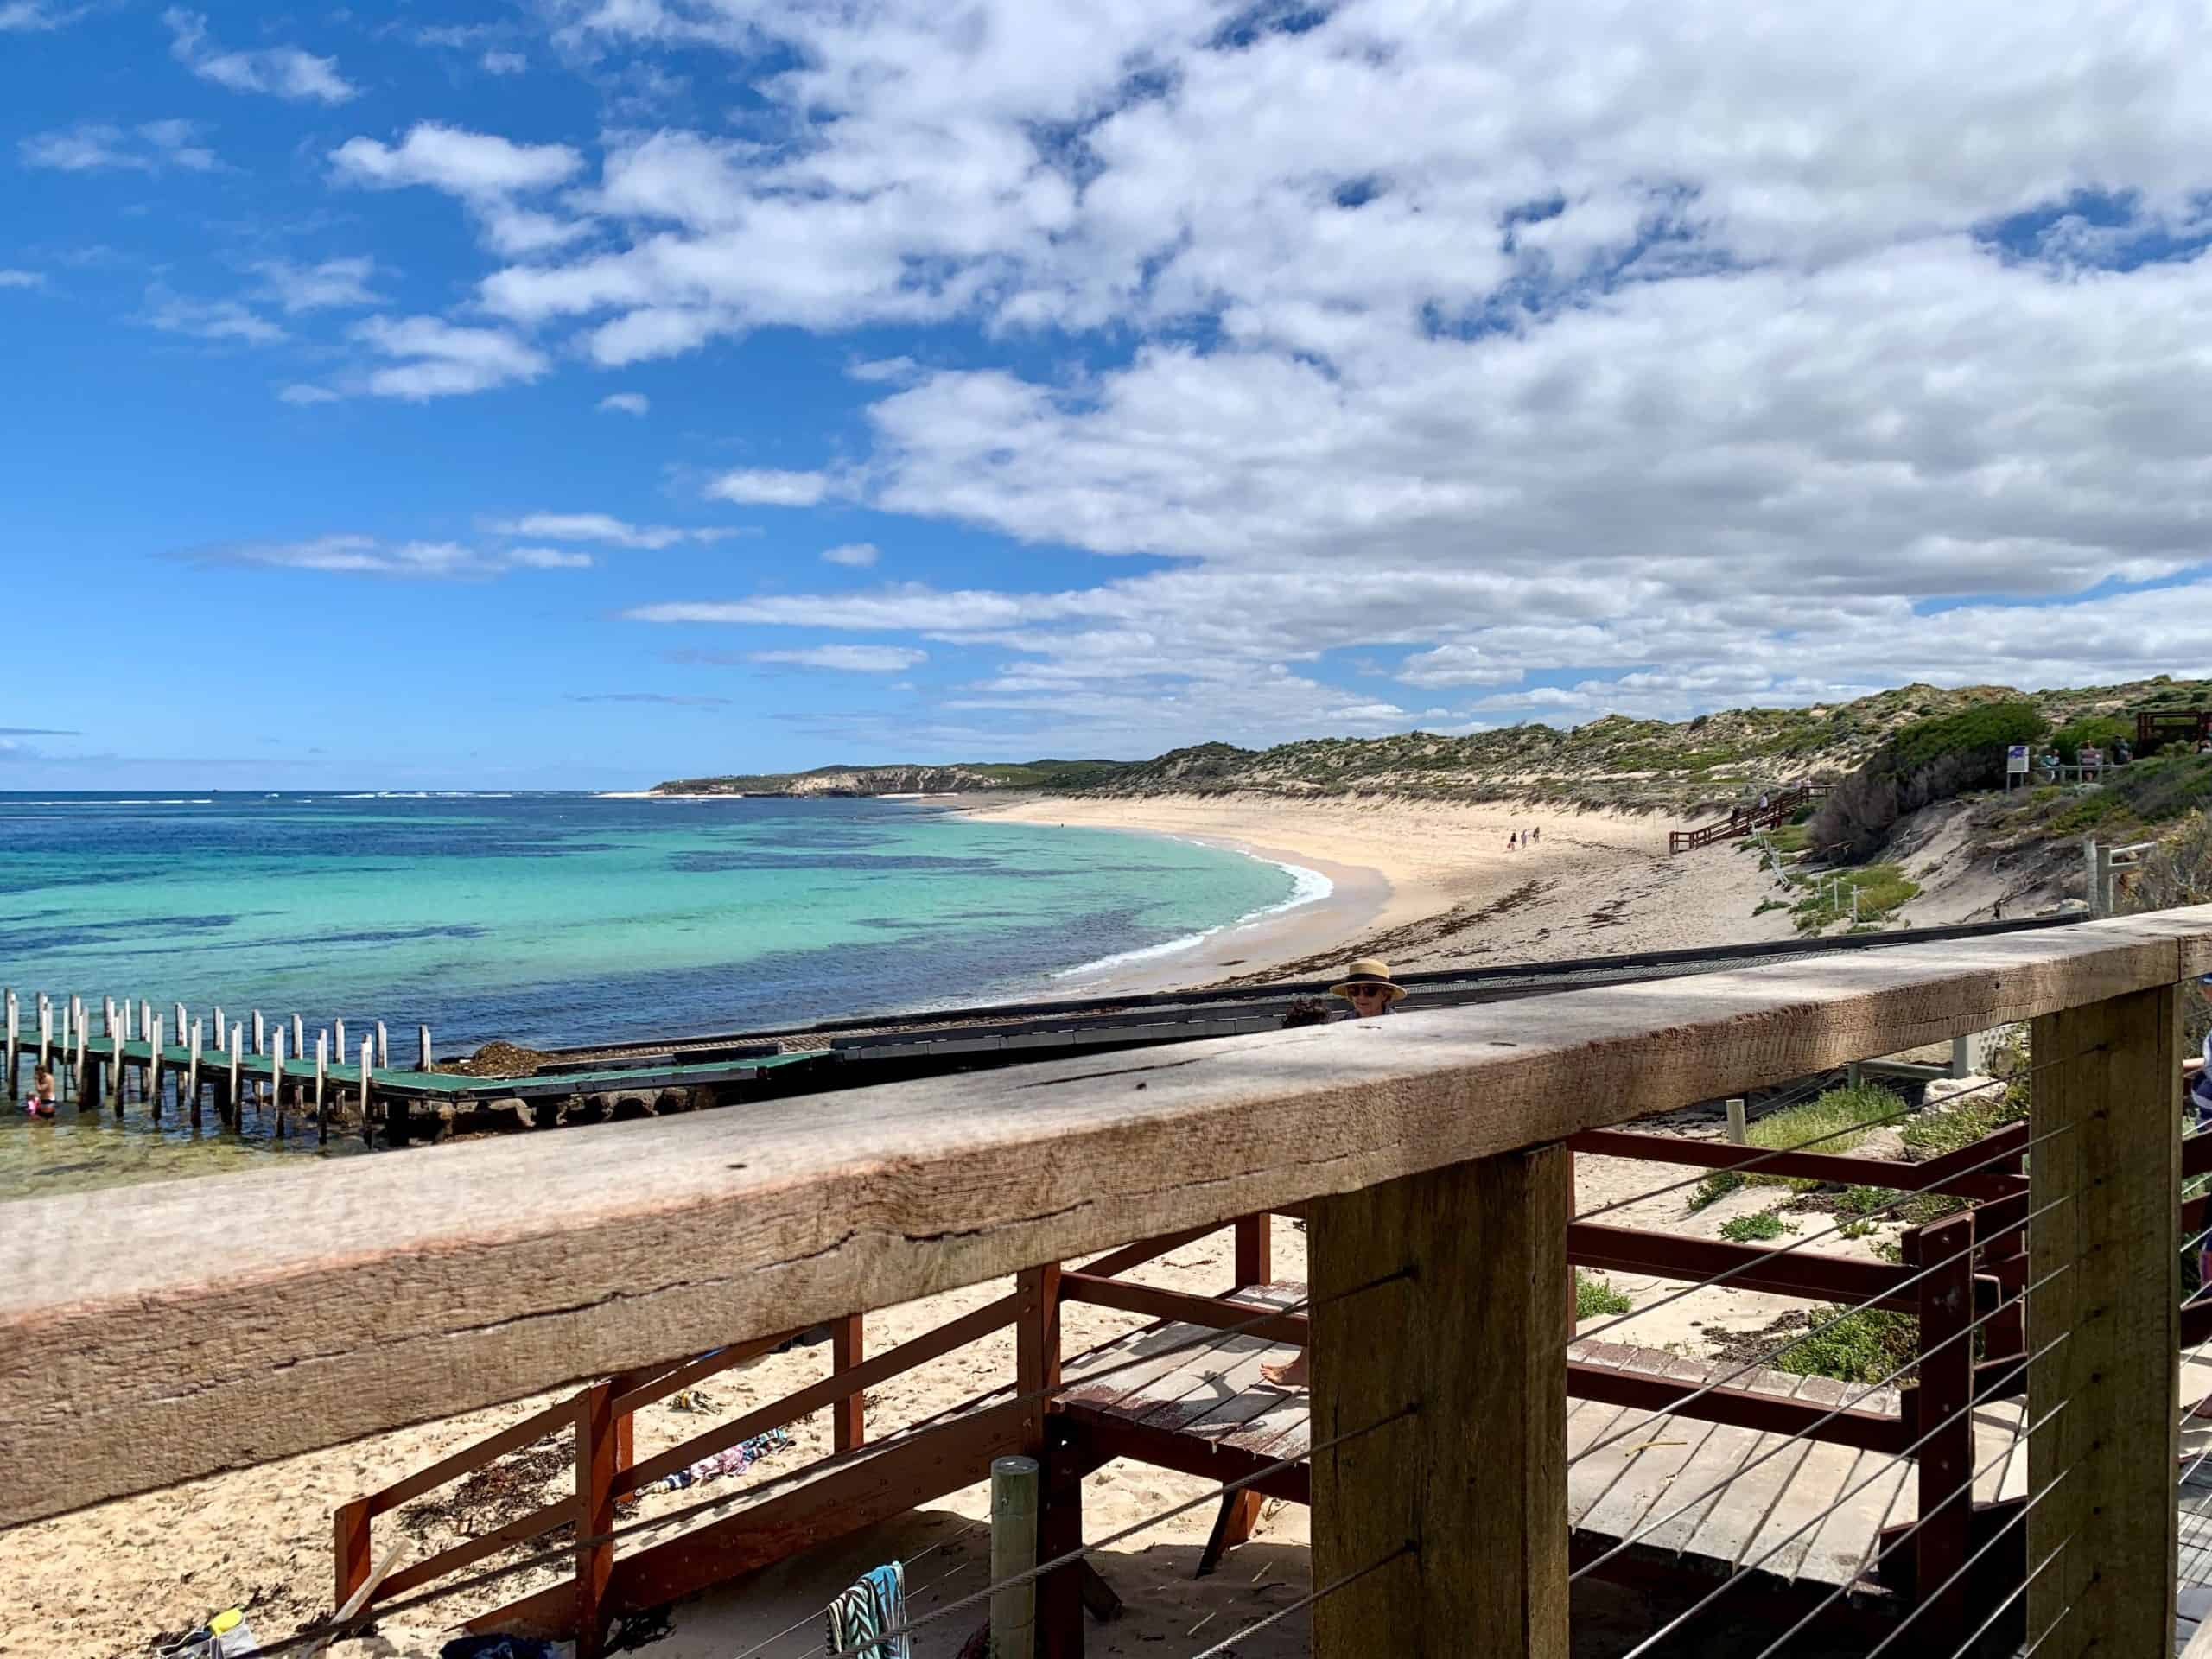 View from a wooden deck framing the stunning curve of a Margaret River beach, where crystal-clear turquoise waters meet a sandy shore, with a rustic jetty extending into the sea and sand dunes under a partly cloudy sky.